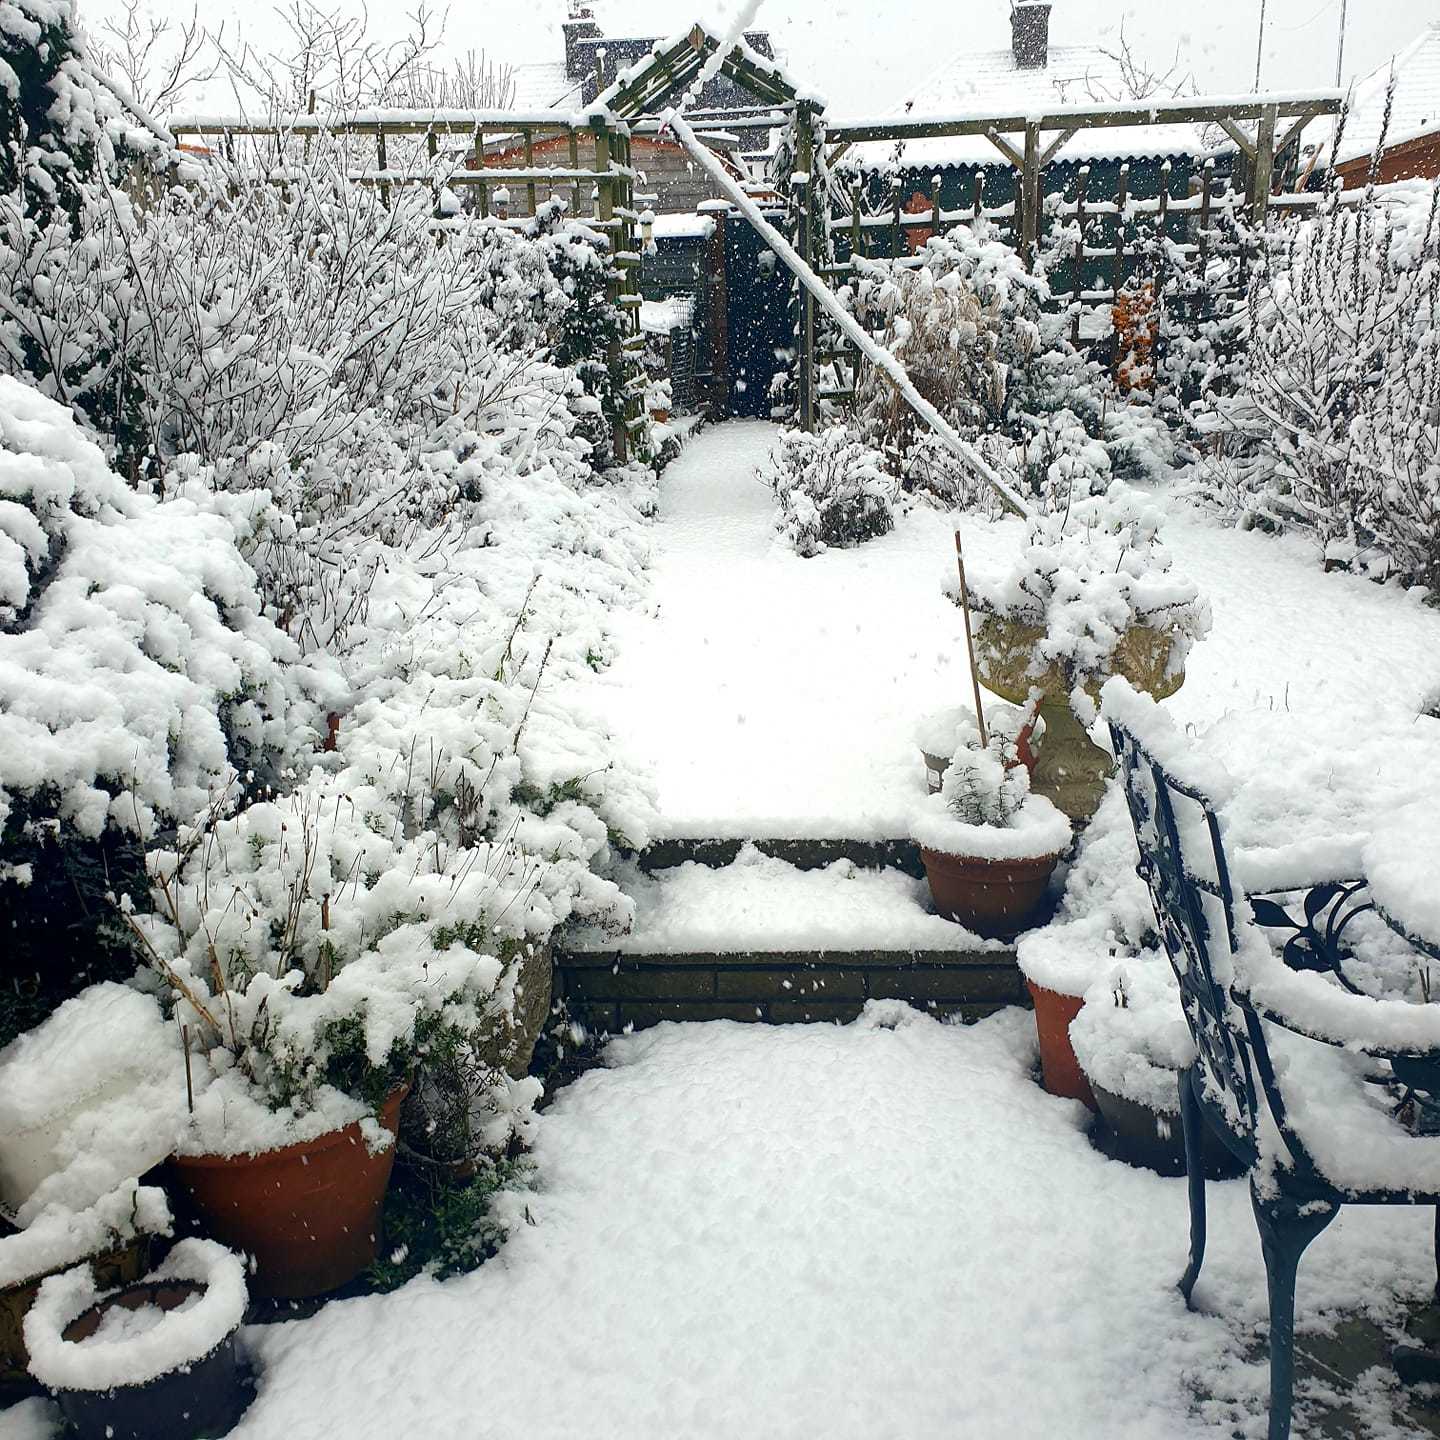 Joanne Atkins showed the thick snow from her garden